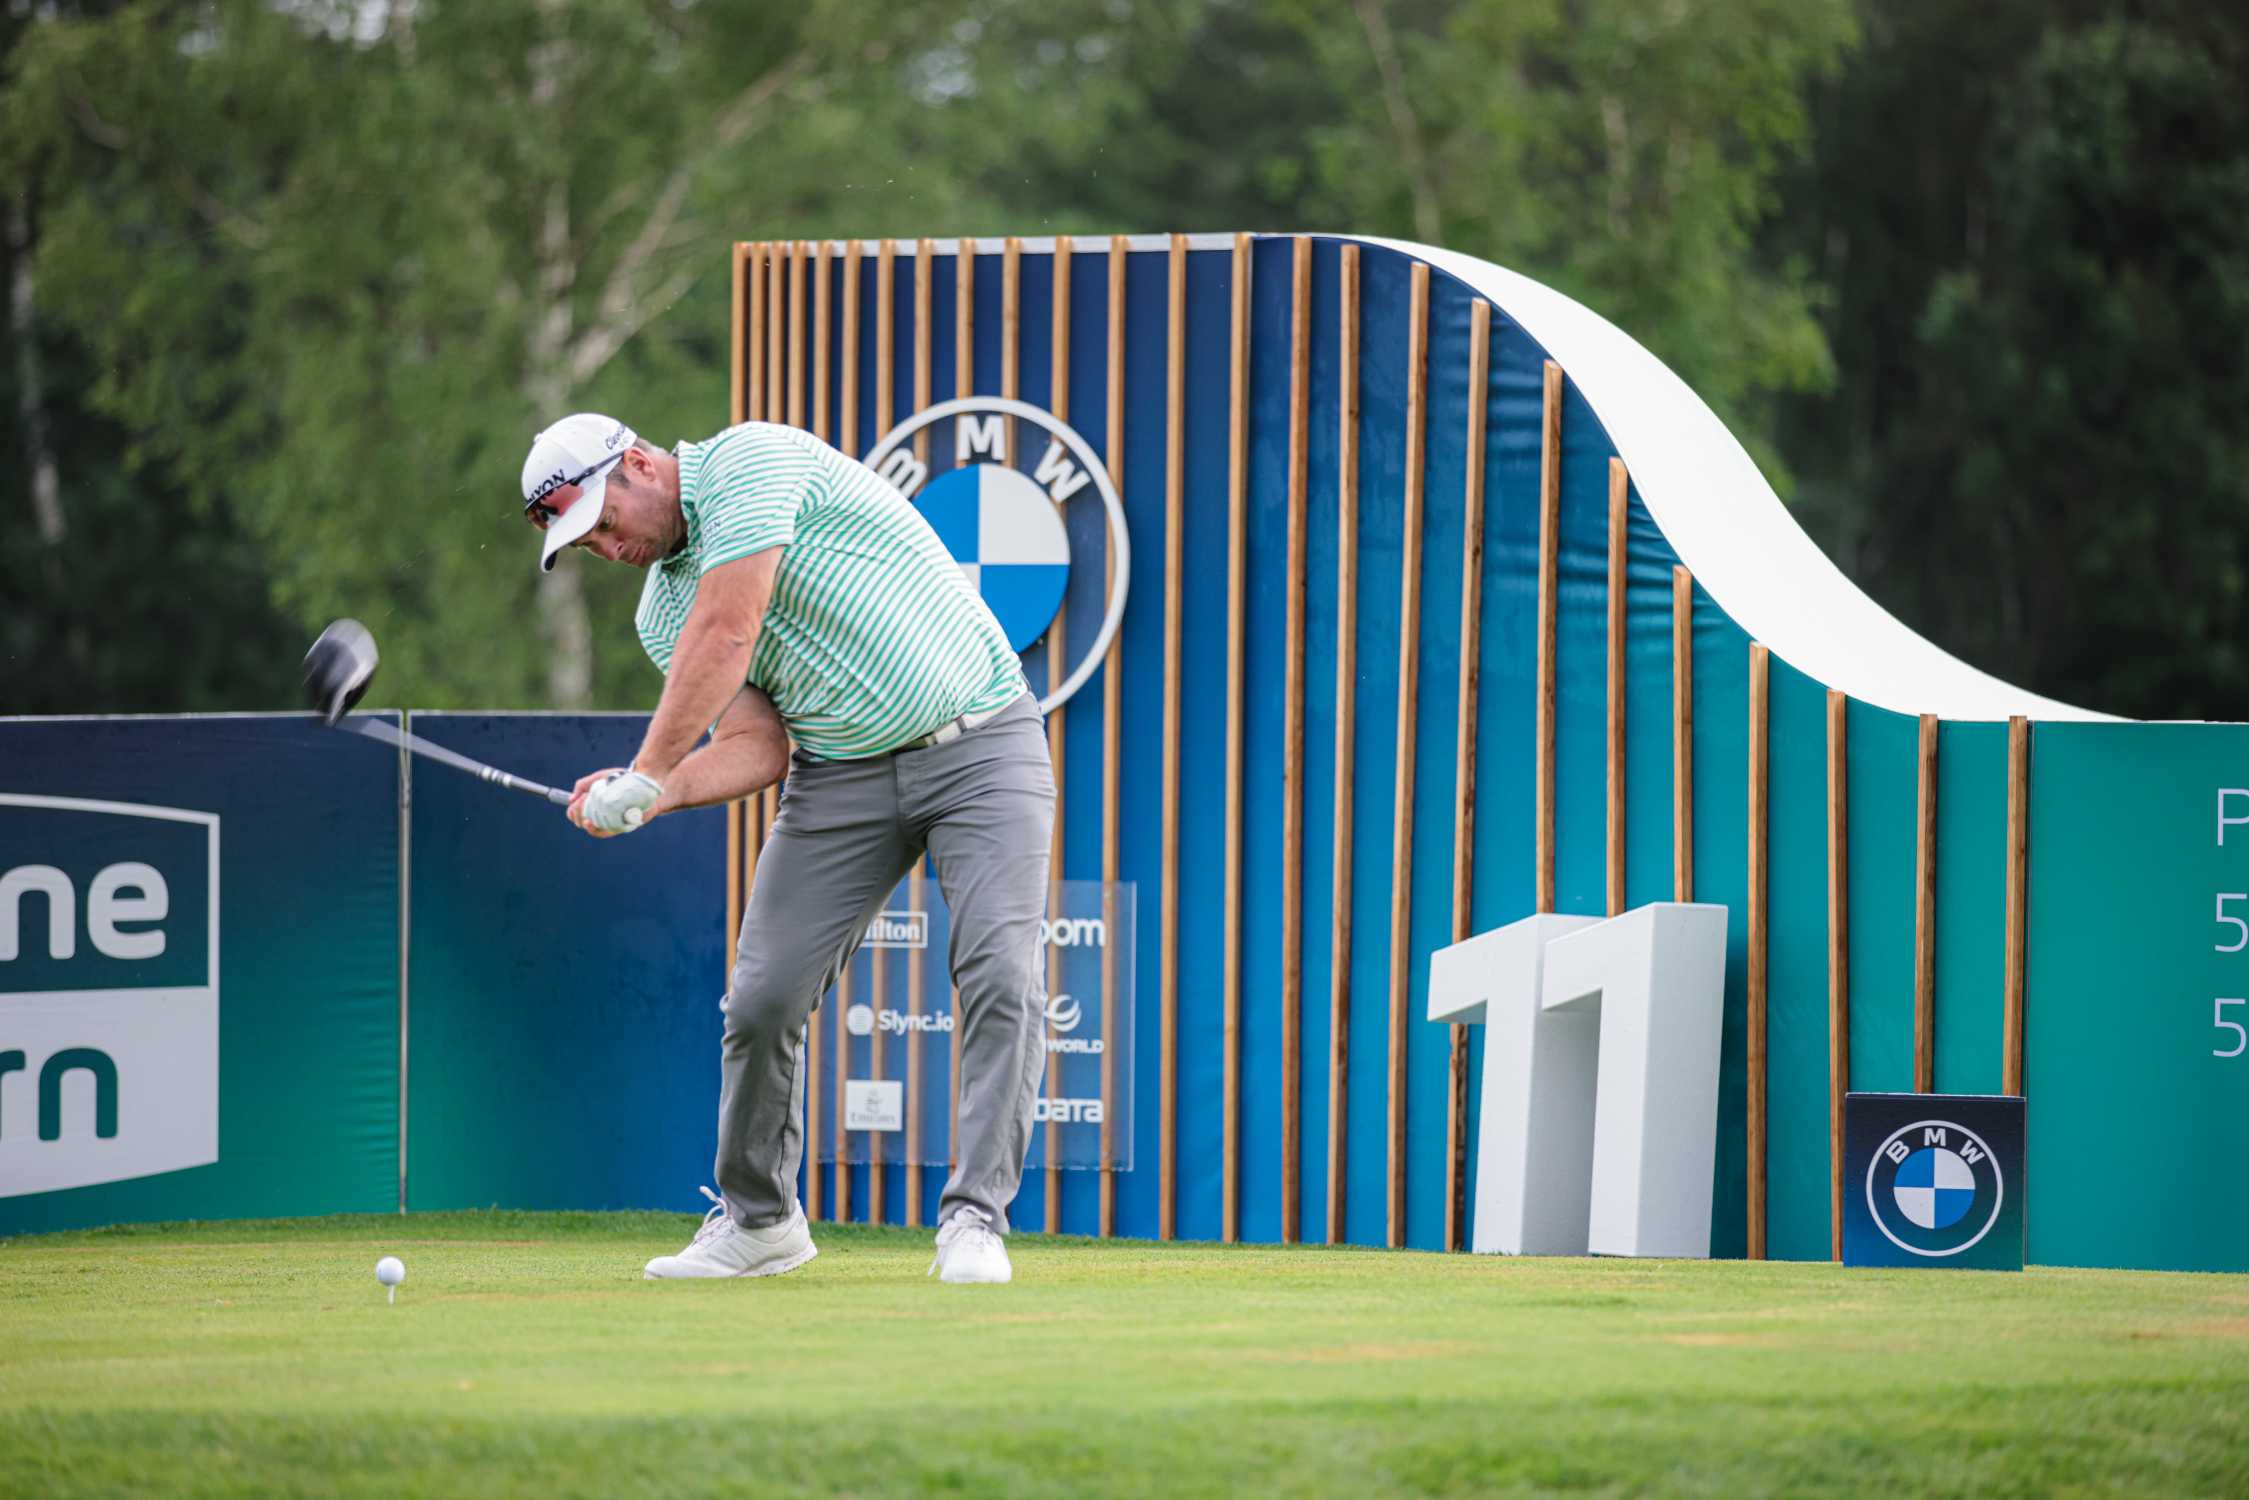 BMW International Open: Stage set for an exciting final weekend.